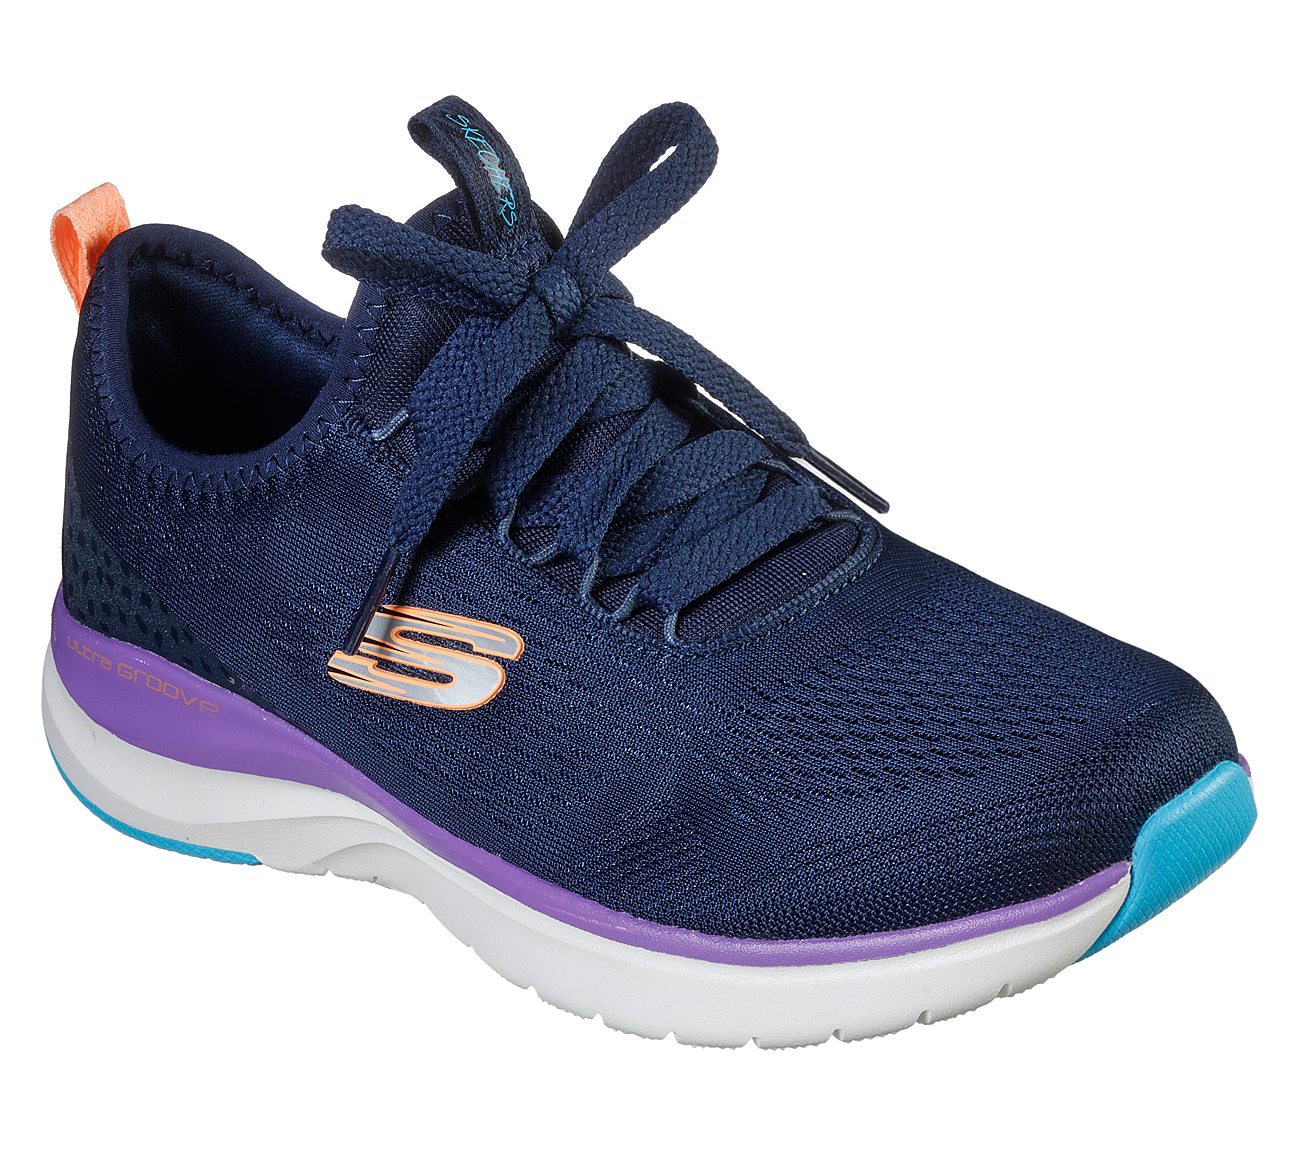 ULTRA GROOVE-QUICK ADVANTAGE, NAVY/MULTI Footwear Lateral View